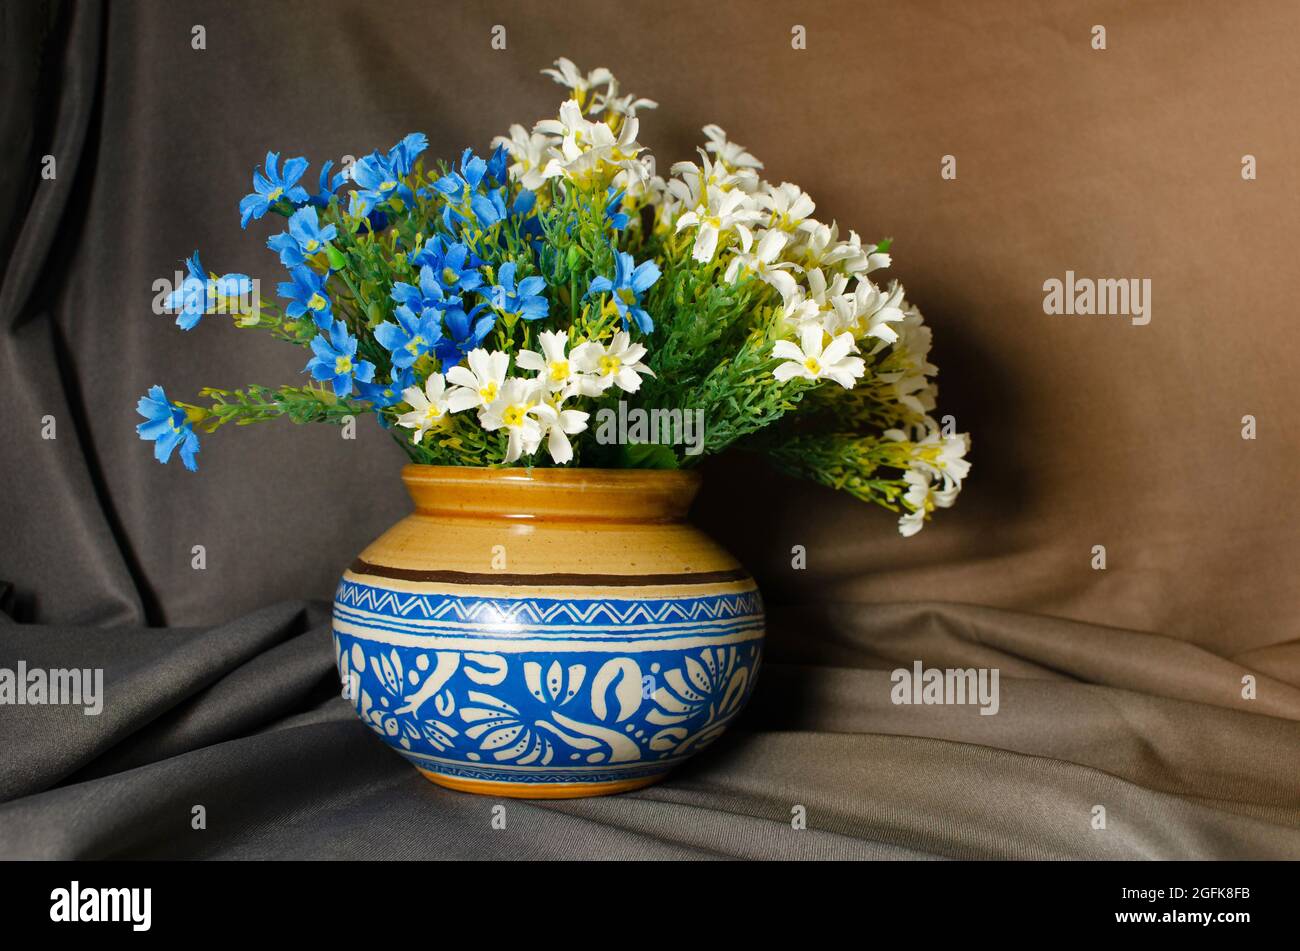 Traditional ceramic pot with Blue design and flowers on Brown background Stock Photo